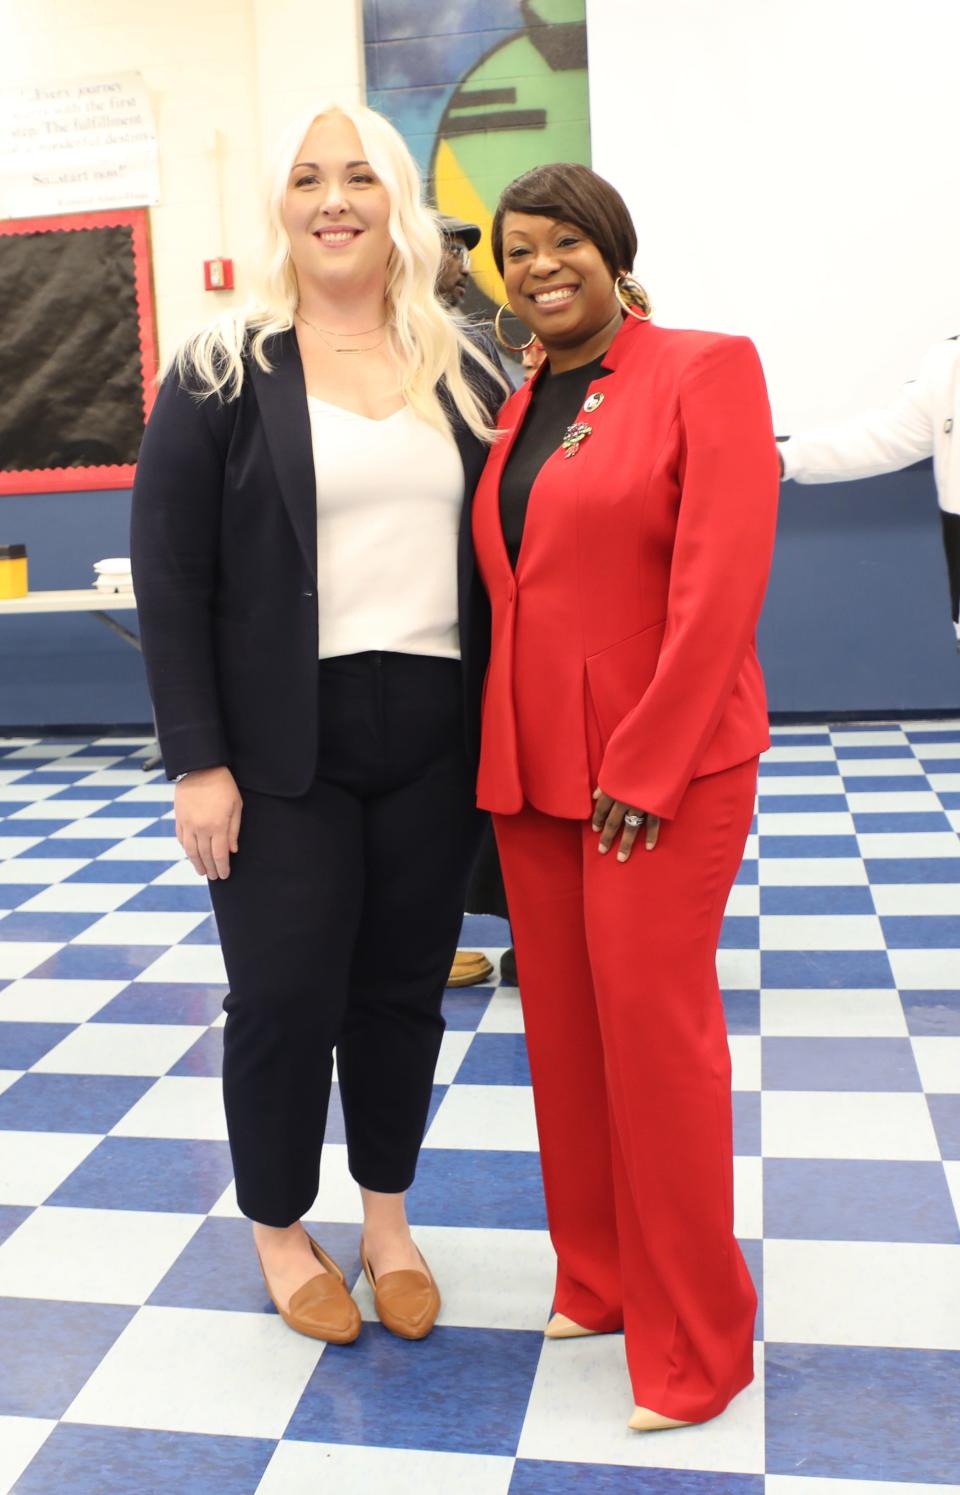 The Plainfield Board of Education welcomed three board members and unanimously elected Hanae M. Wyatt (right) as president and Sarah B. Virgo (left) as vice president, at the 2023 reorganization meeting held at Plainfield High School.